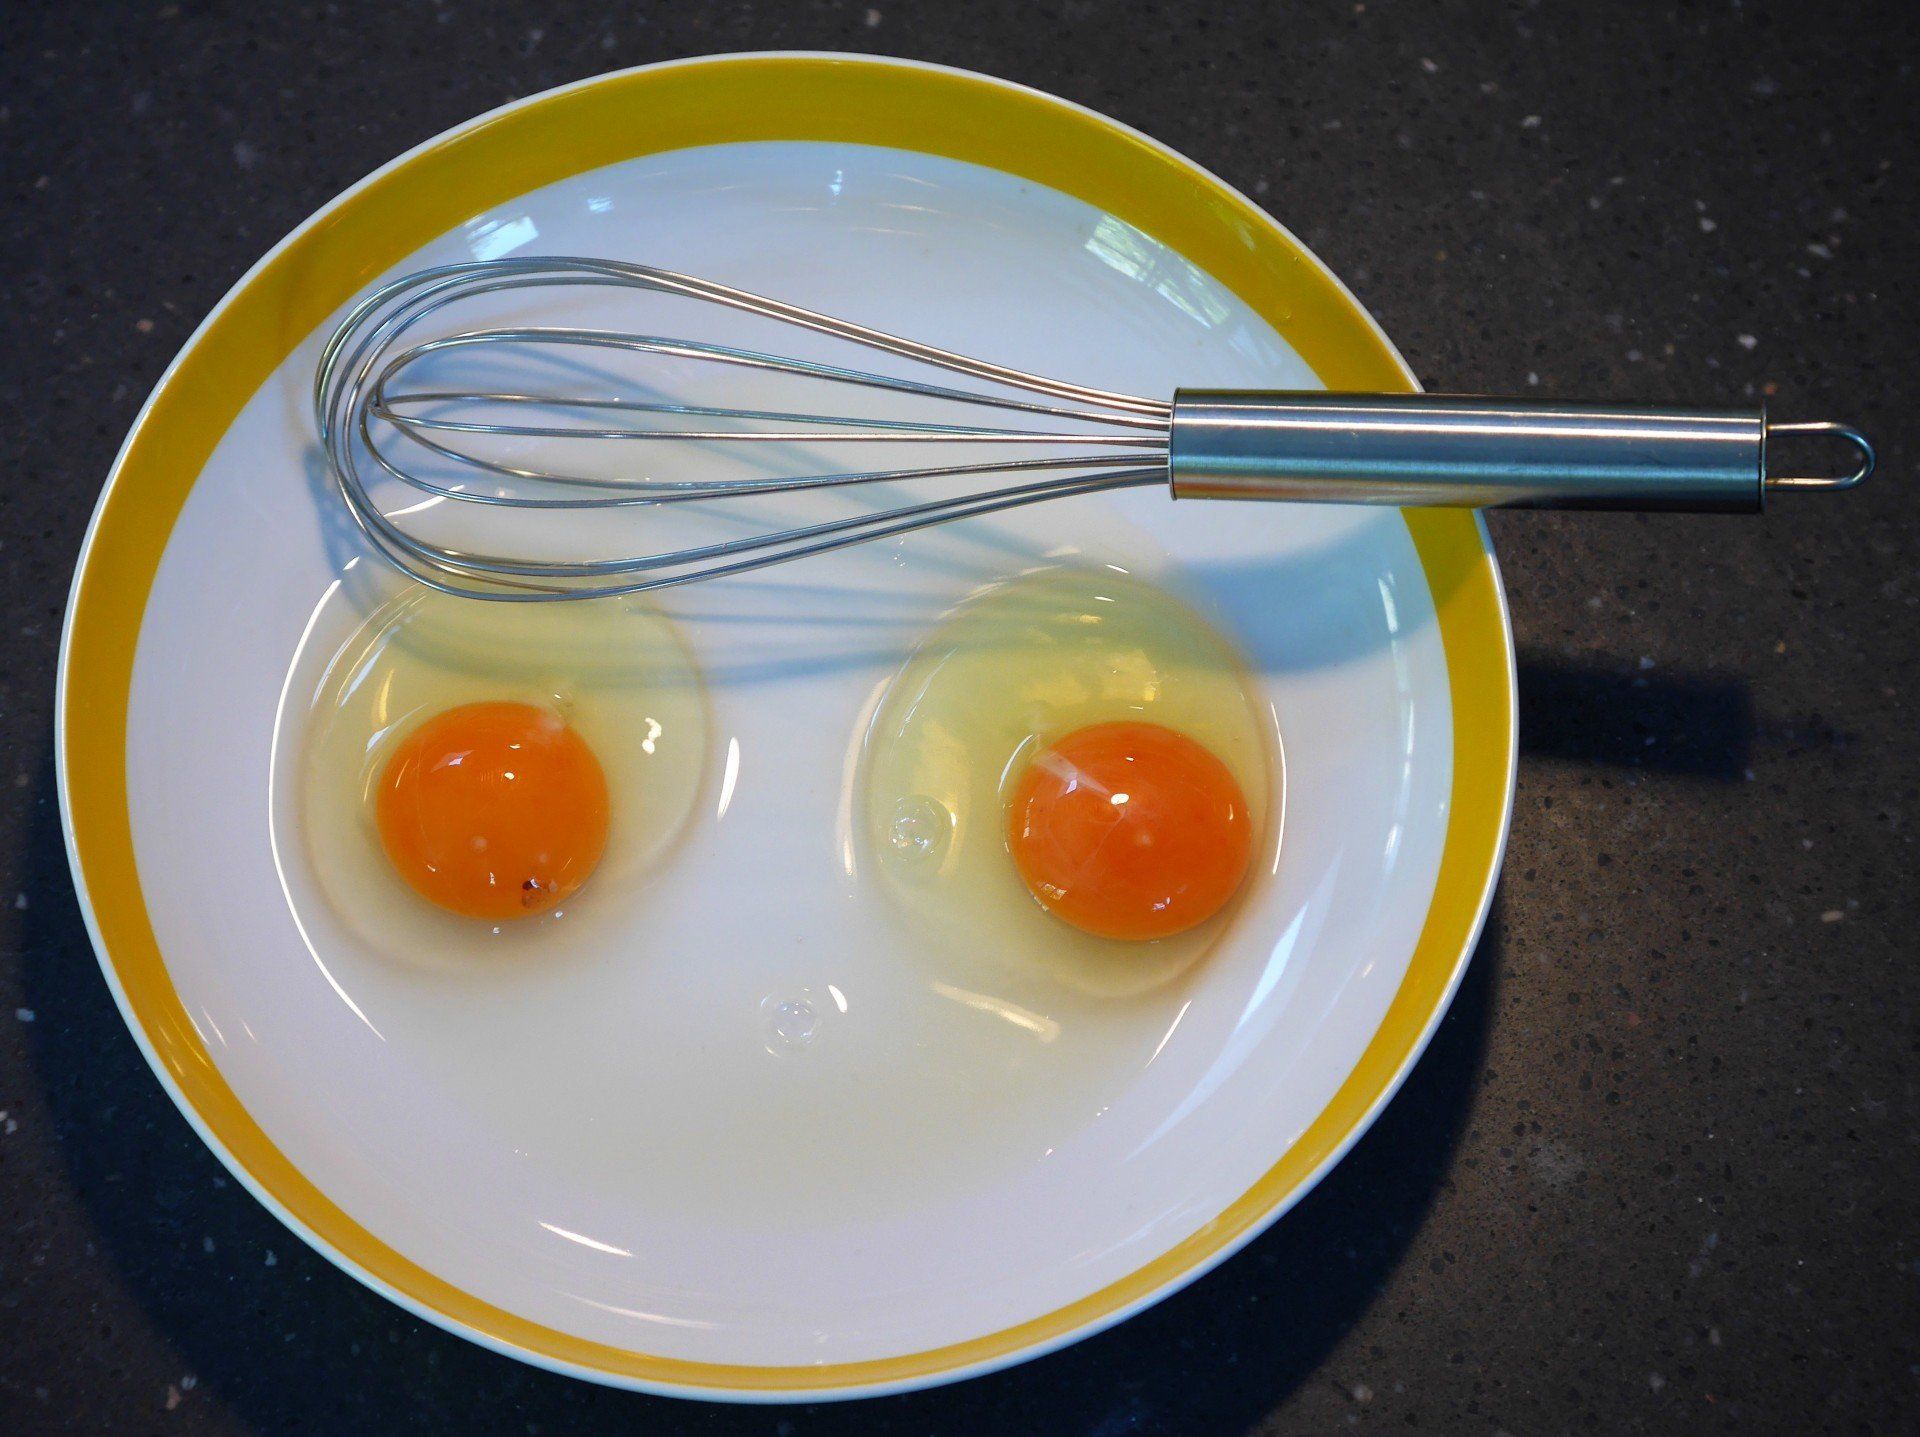 Two egg yolks in a dish with a whisk